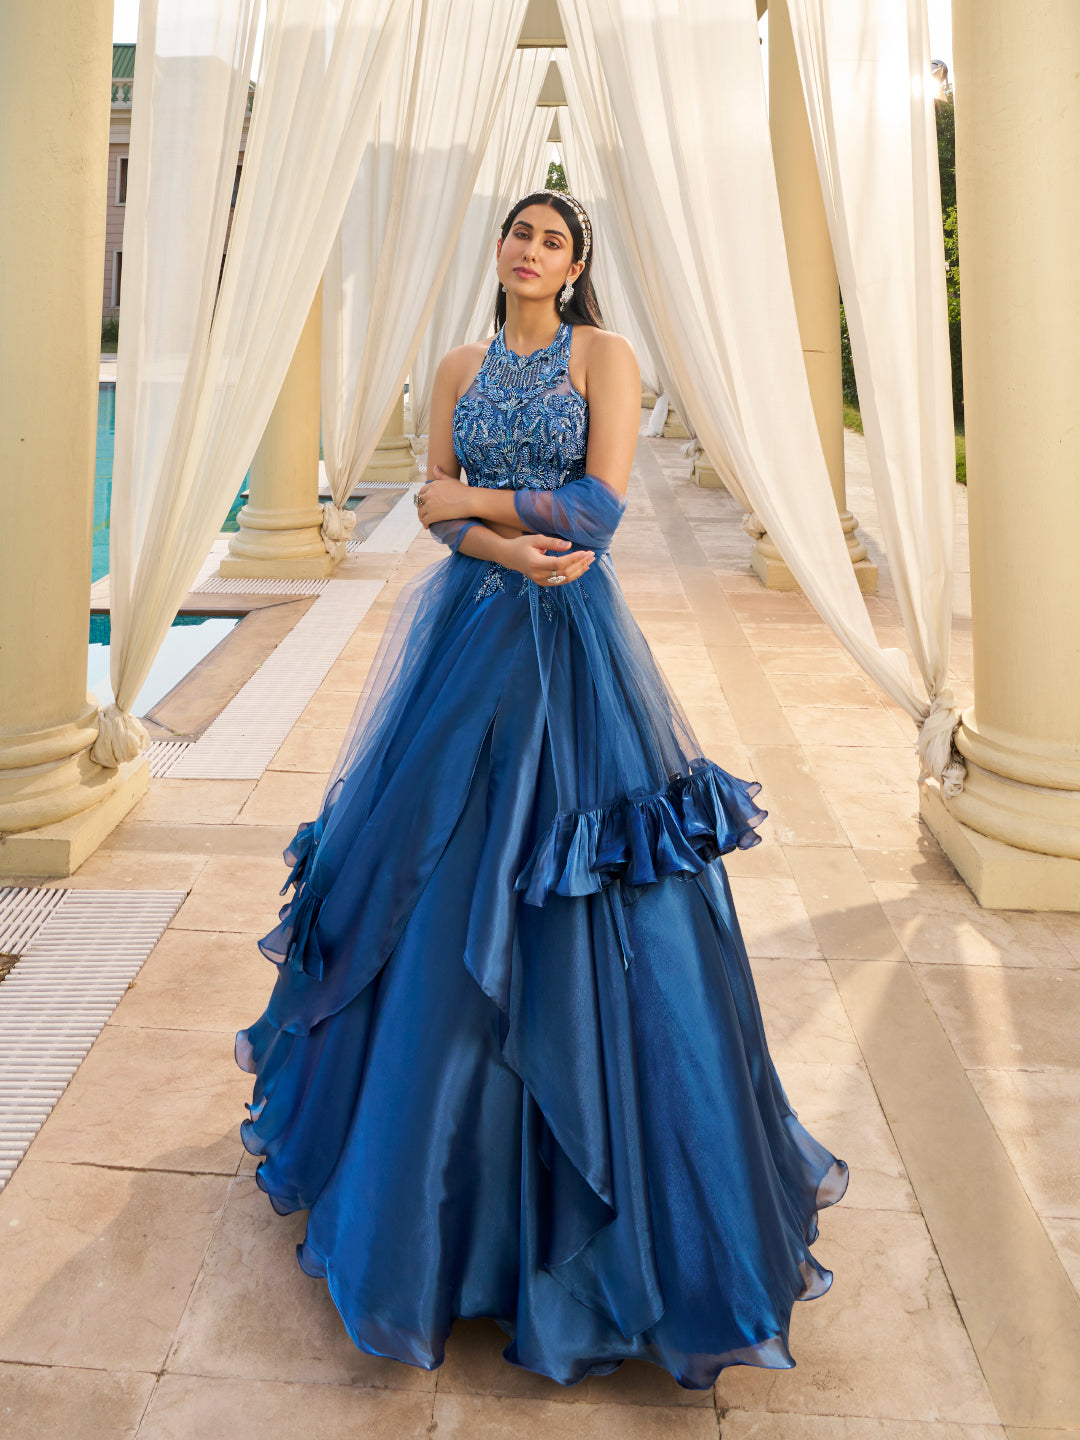 Get Inspired to Wear These Glamorous Indo-Western Gowns at Your Wedding